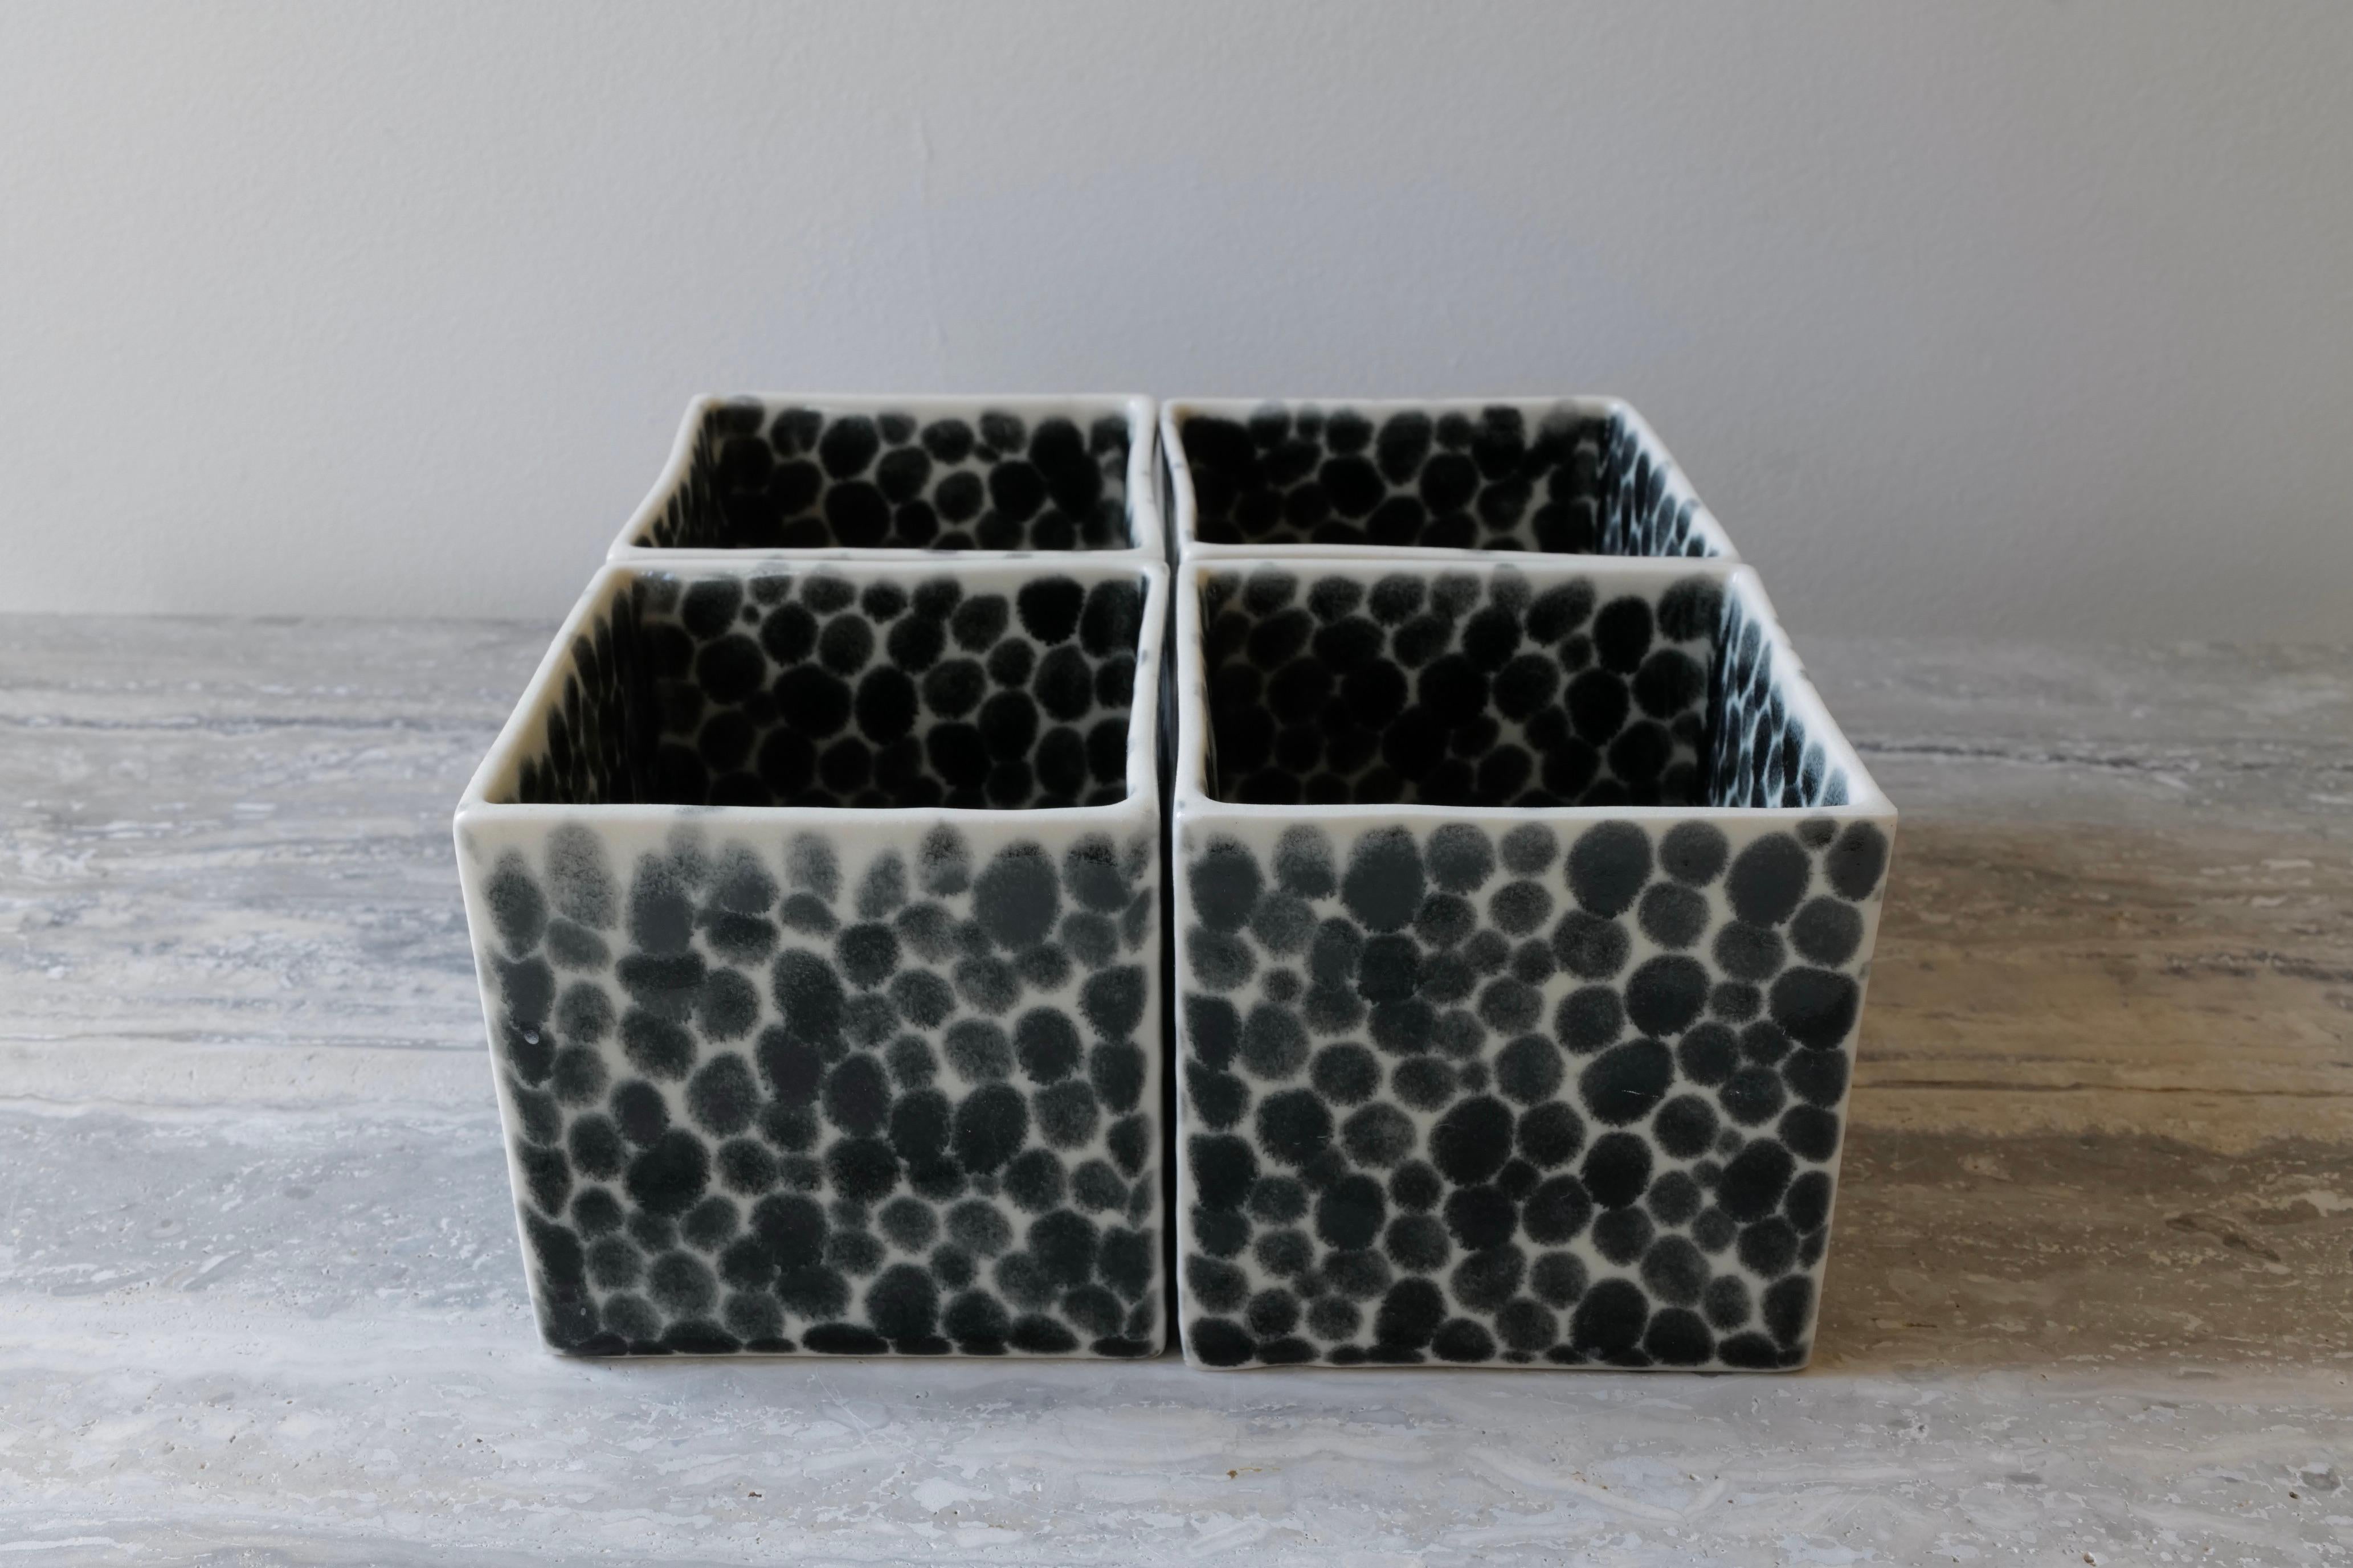 Set of 4 elegant open cubes, which function together as a sculpture or could be filled with cookies, nuts, tea bags or else. Hand-cast in porcelain and once bisque fired, each dot is hand-painted with shiny black glaze. An unconventional layered